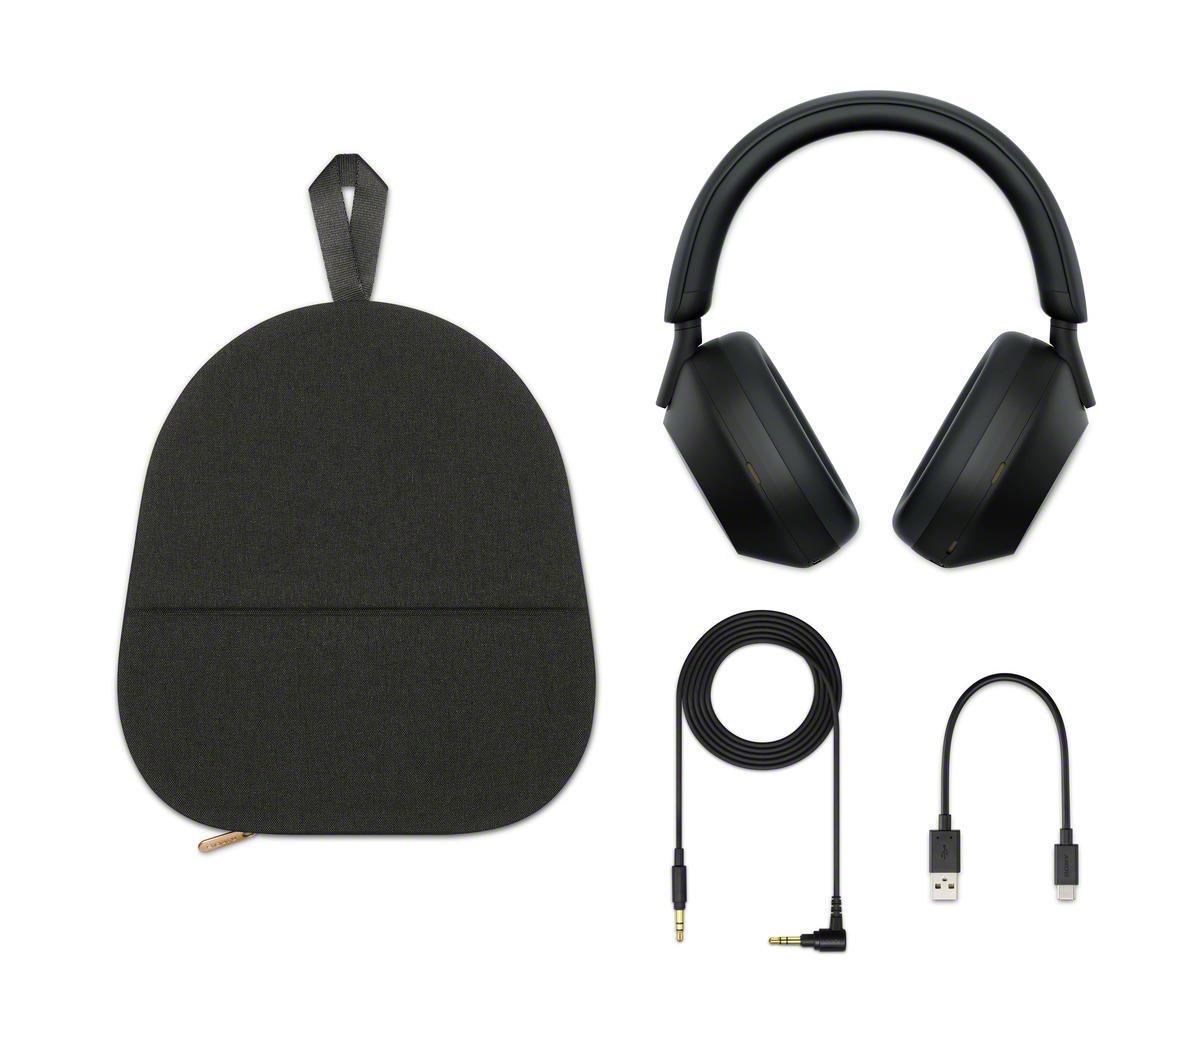 Sony WF-1000XM4 Industry Leading Active Noise Cancellation